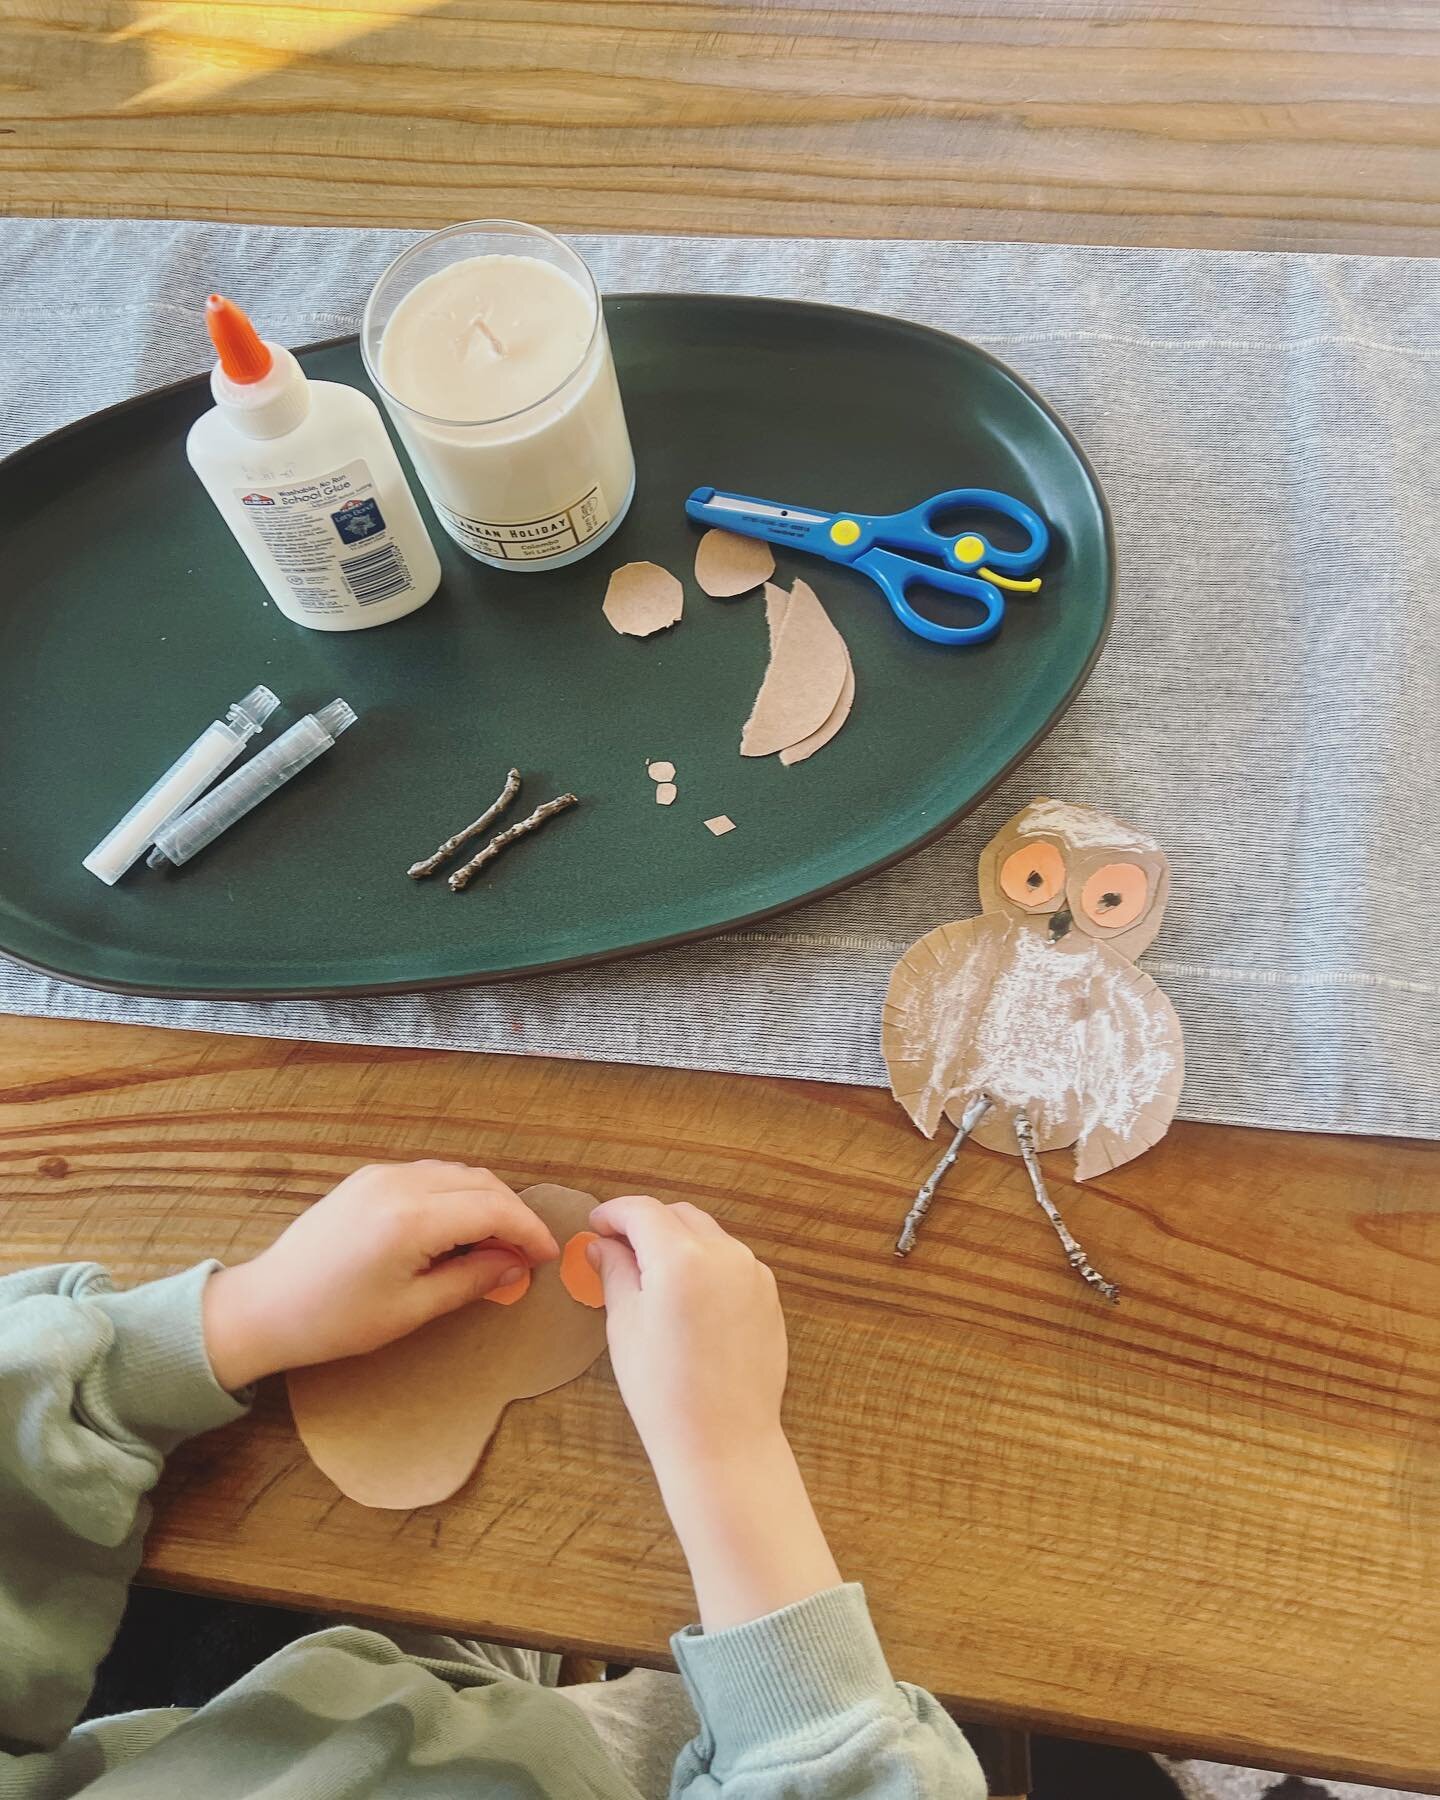 🦉✂️ Activity Idea to target Executive Functions at an early age. 

Provide a FINISHED craft &amp; materials needed. Encourage your child to use the model to plan, problem solve, and carry out the steps to make the craft! 

🧠Executive functions, vis